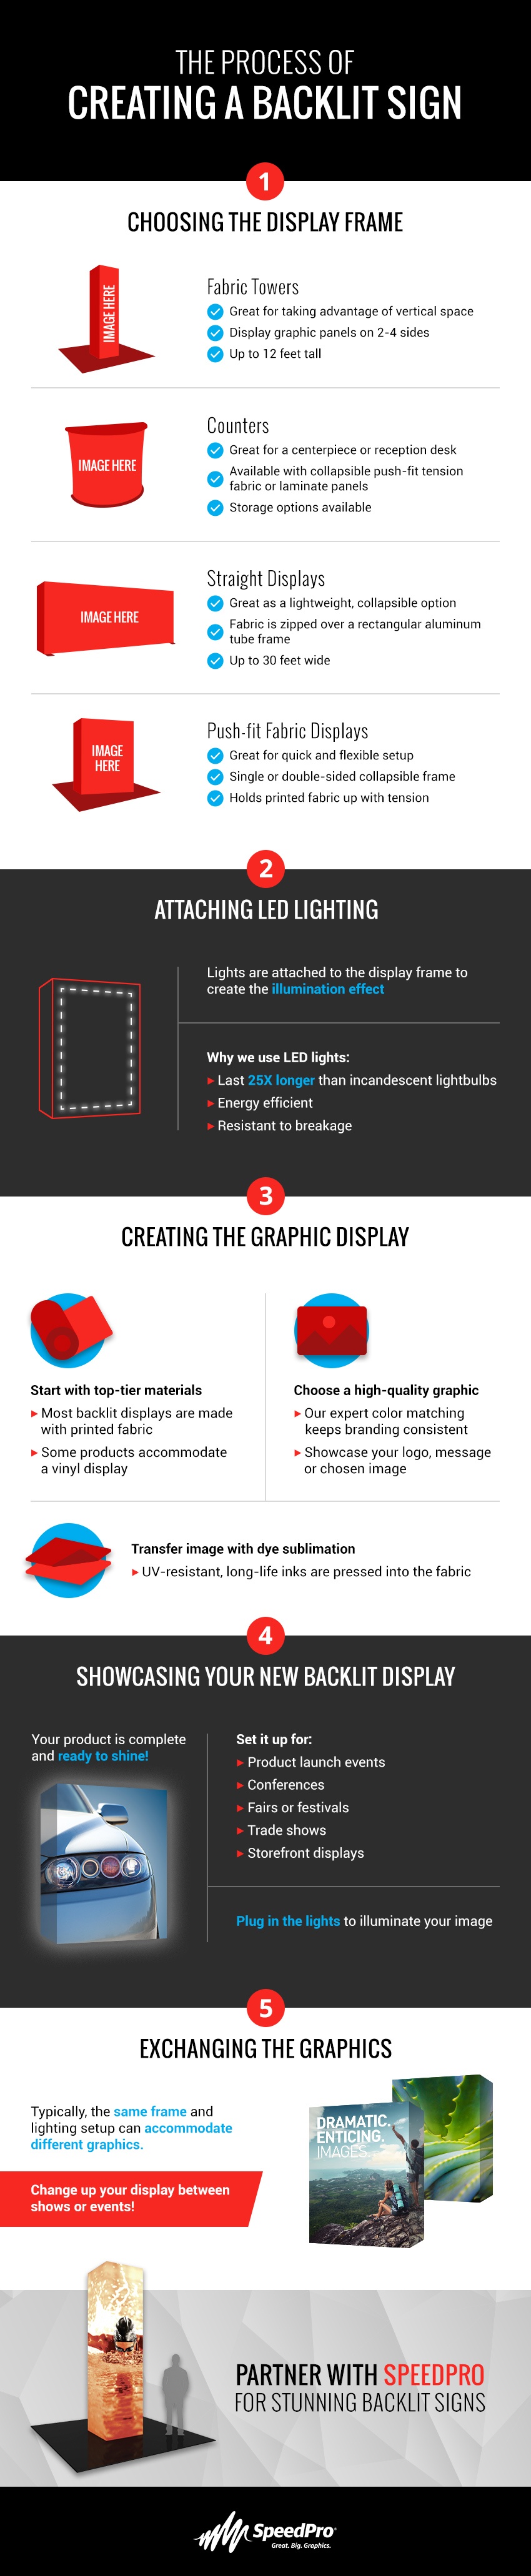 The Process of Creating a Backlit Sign [infographic]